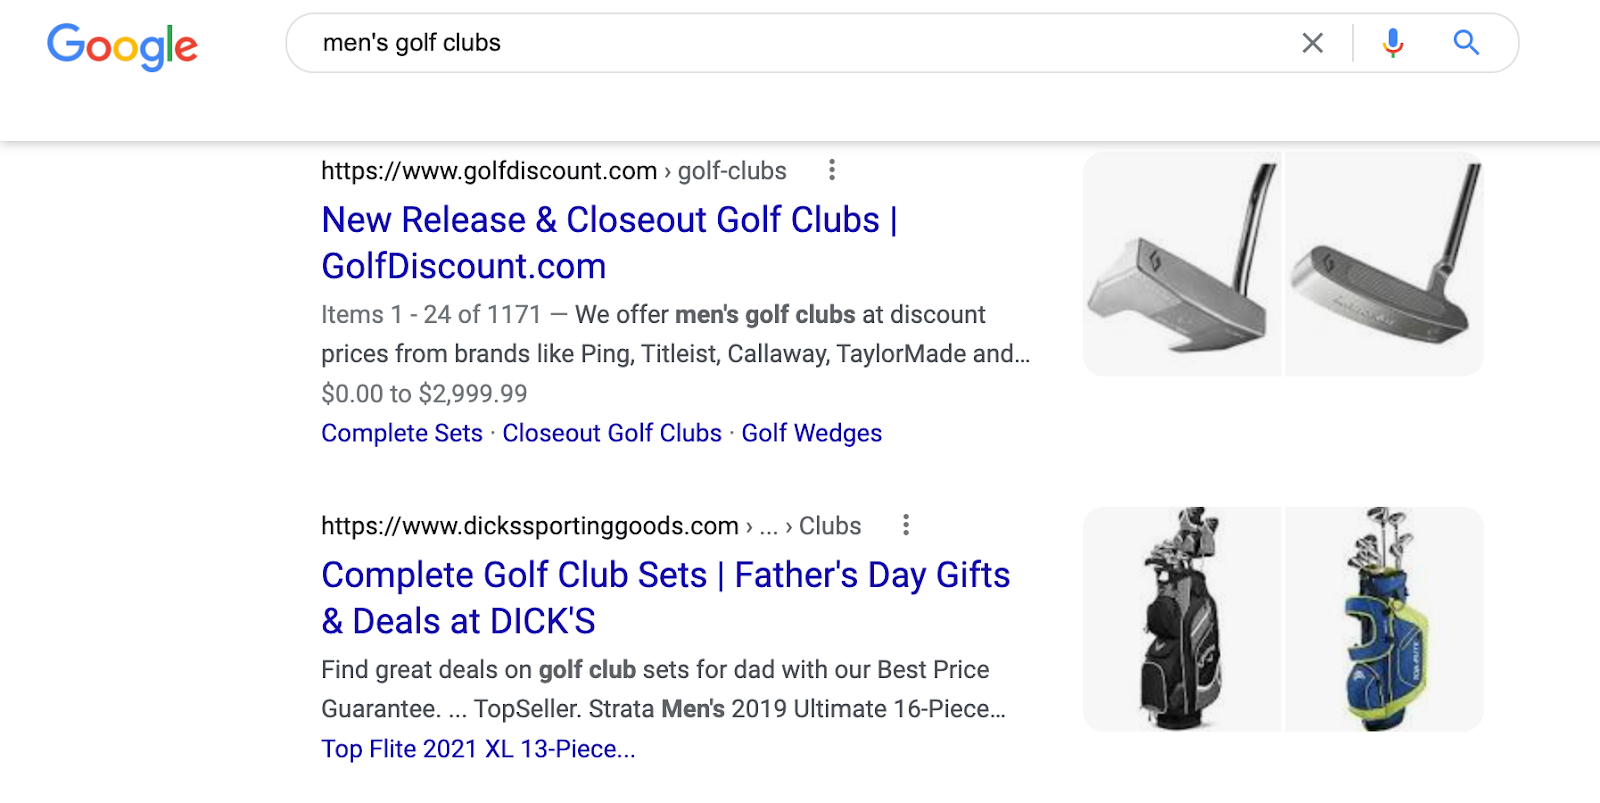 Men s golf clubs search results - google search